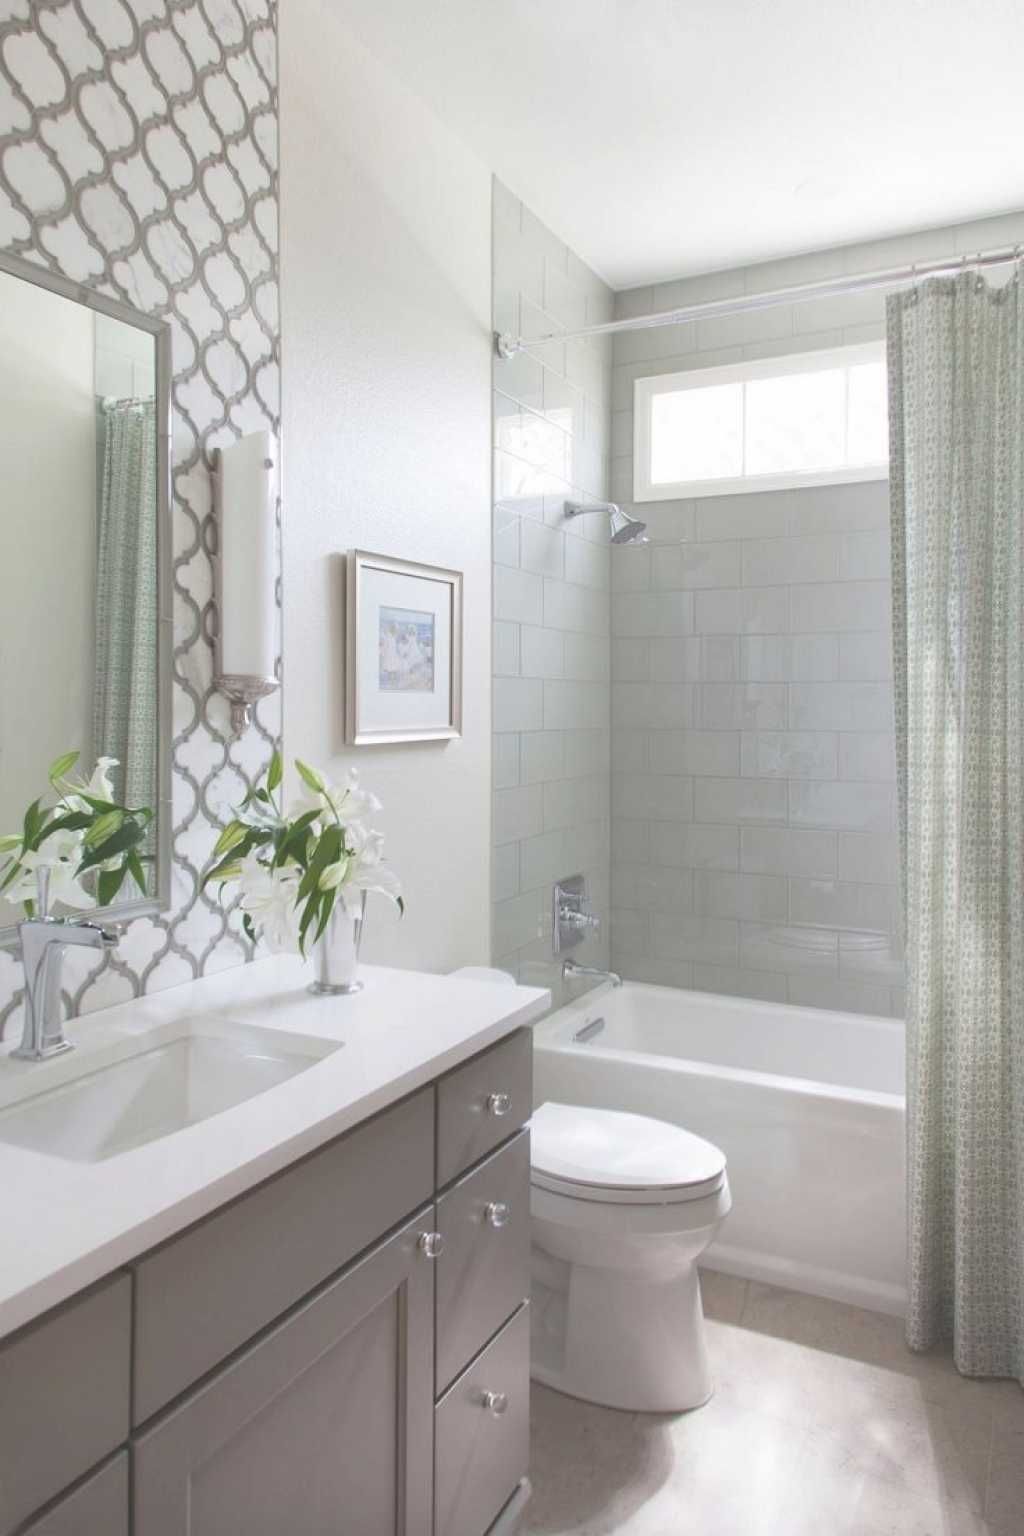 Remodel Your Small Bathroom Fast and Inexpensively